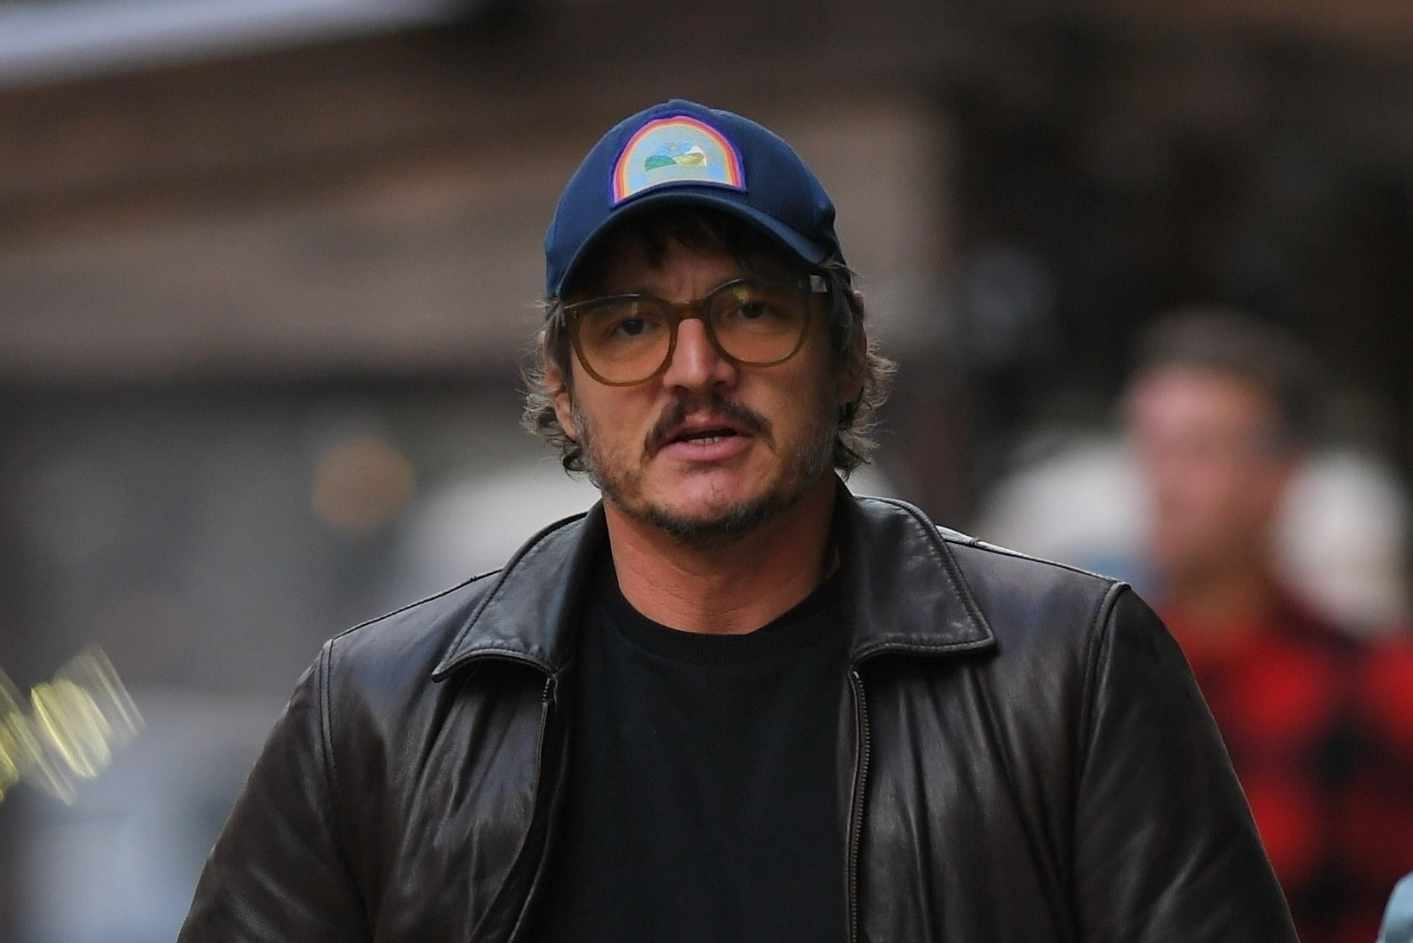 Pedro Pascal is seen wearing a baseball hat, oversized glasses, leather jacket, black T-shirt, washed out denim jeans & New Balance 237 sneakers